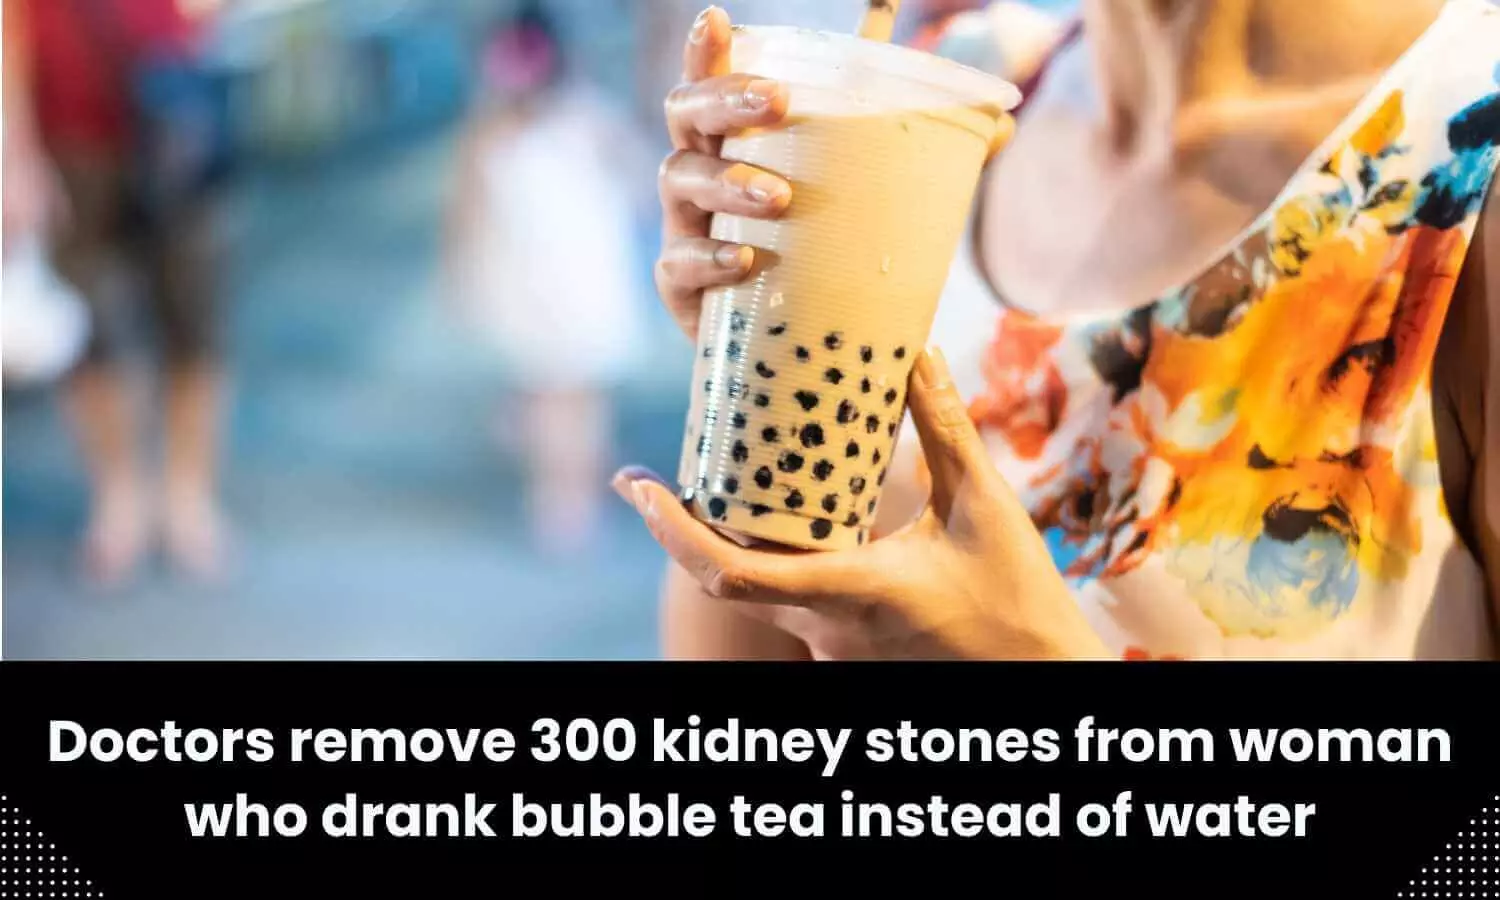 Doctors remove 300 kidney stones from woman who consumed bubble tea instead of water